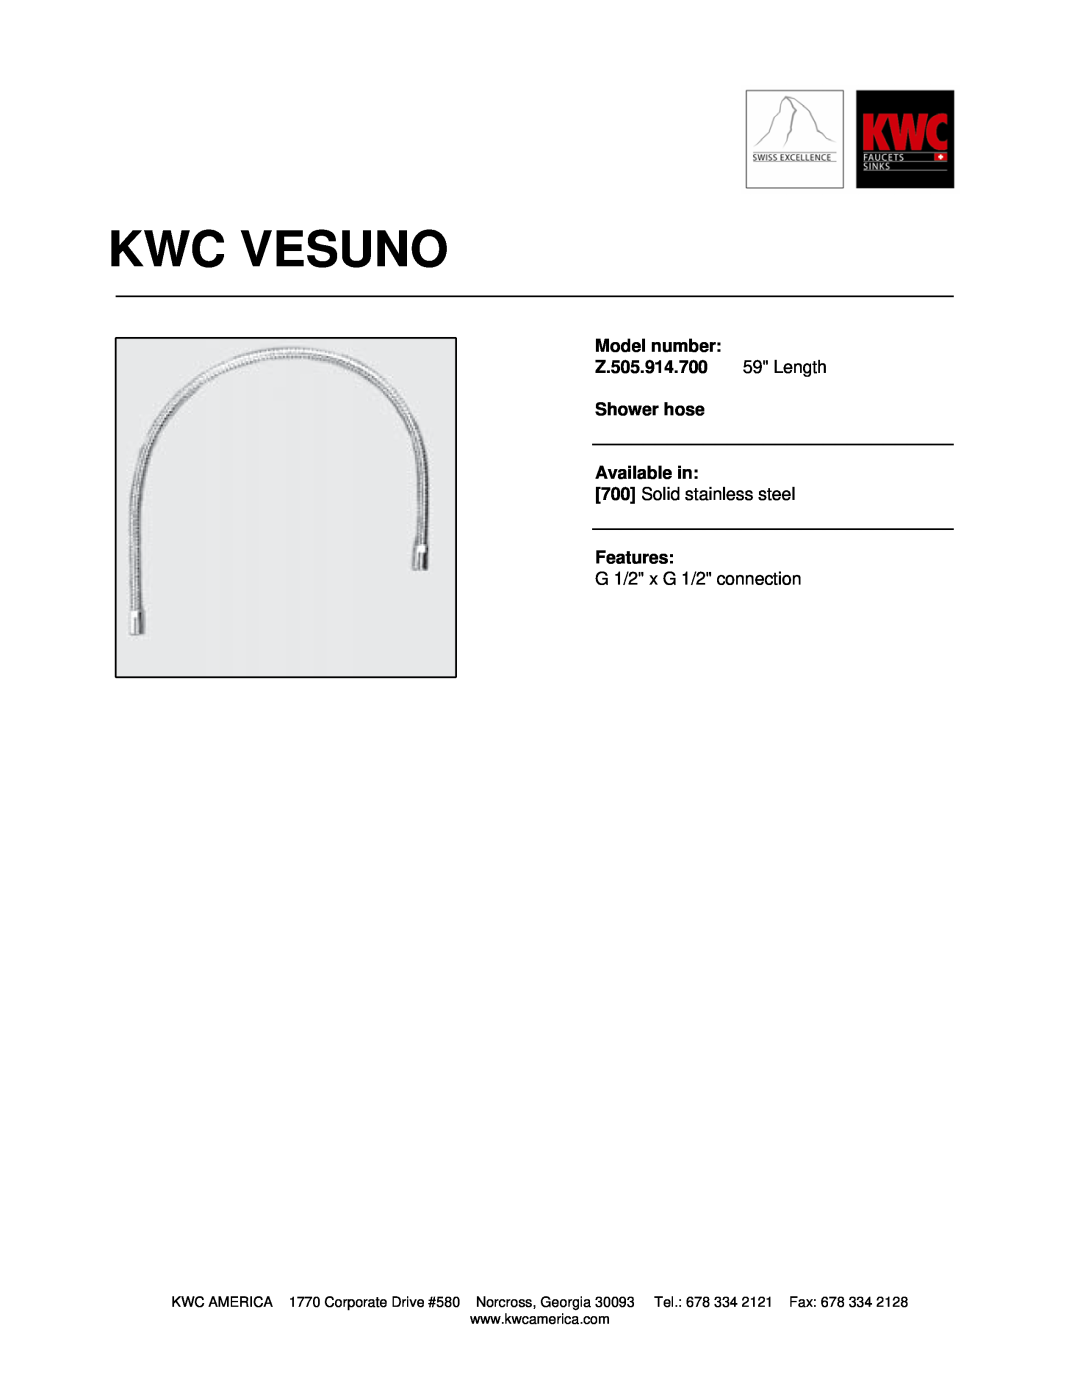 KWC Z.505.914.700 manual Kwc Vesuno, Model number, Length, Shower hose, Available in, Solid stainless steel, Features 